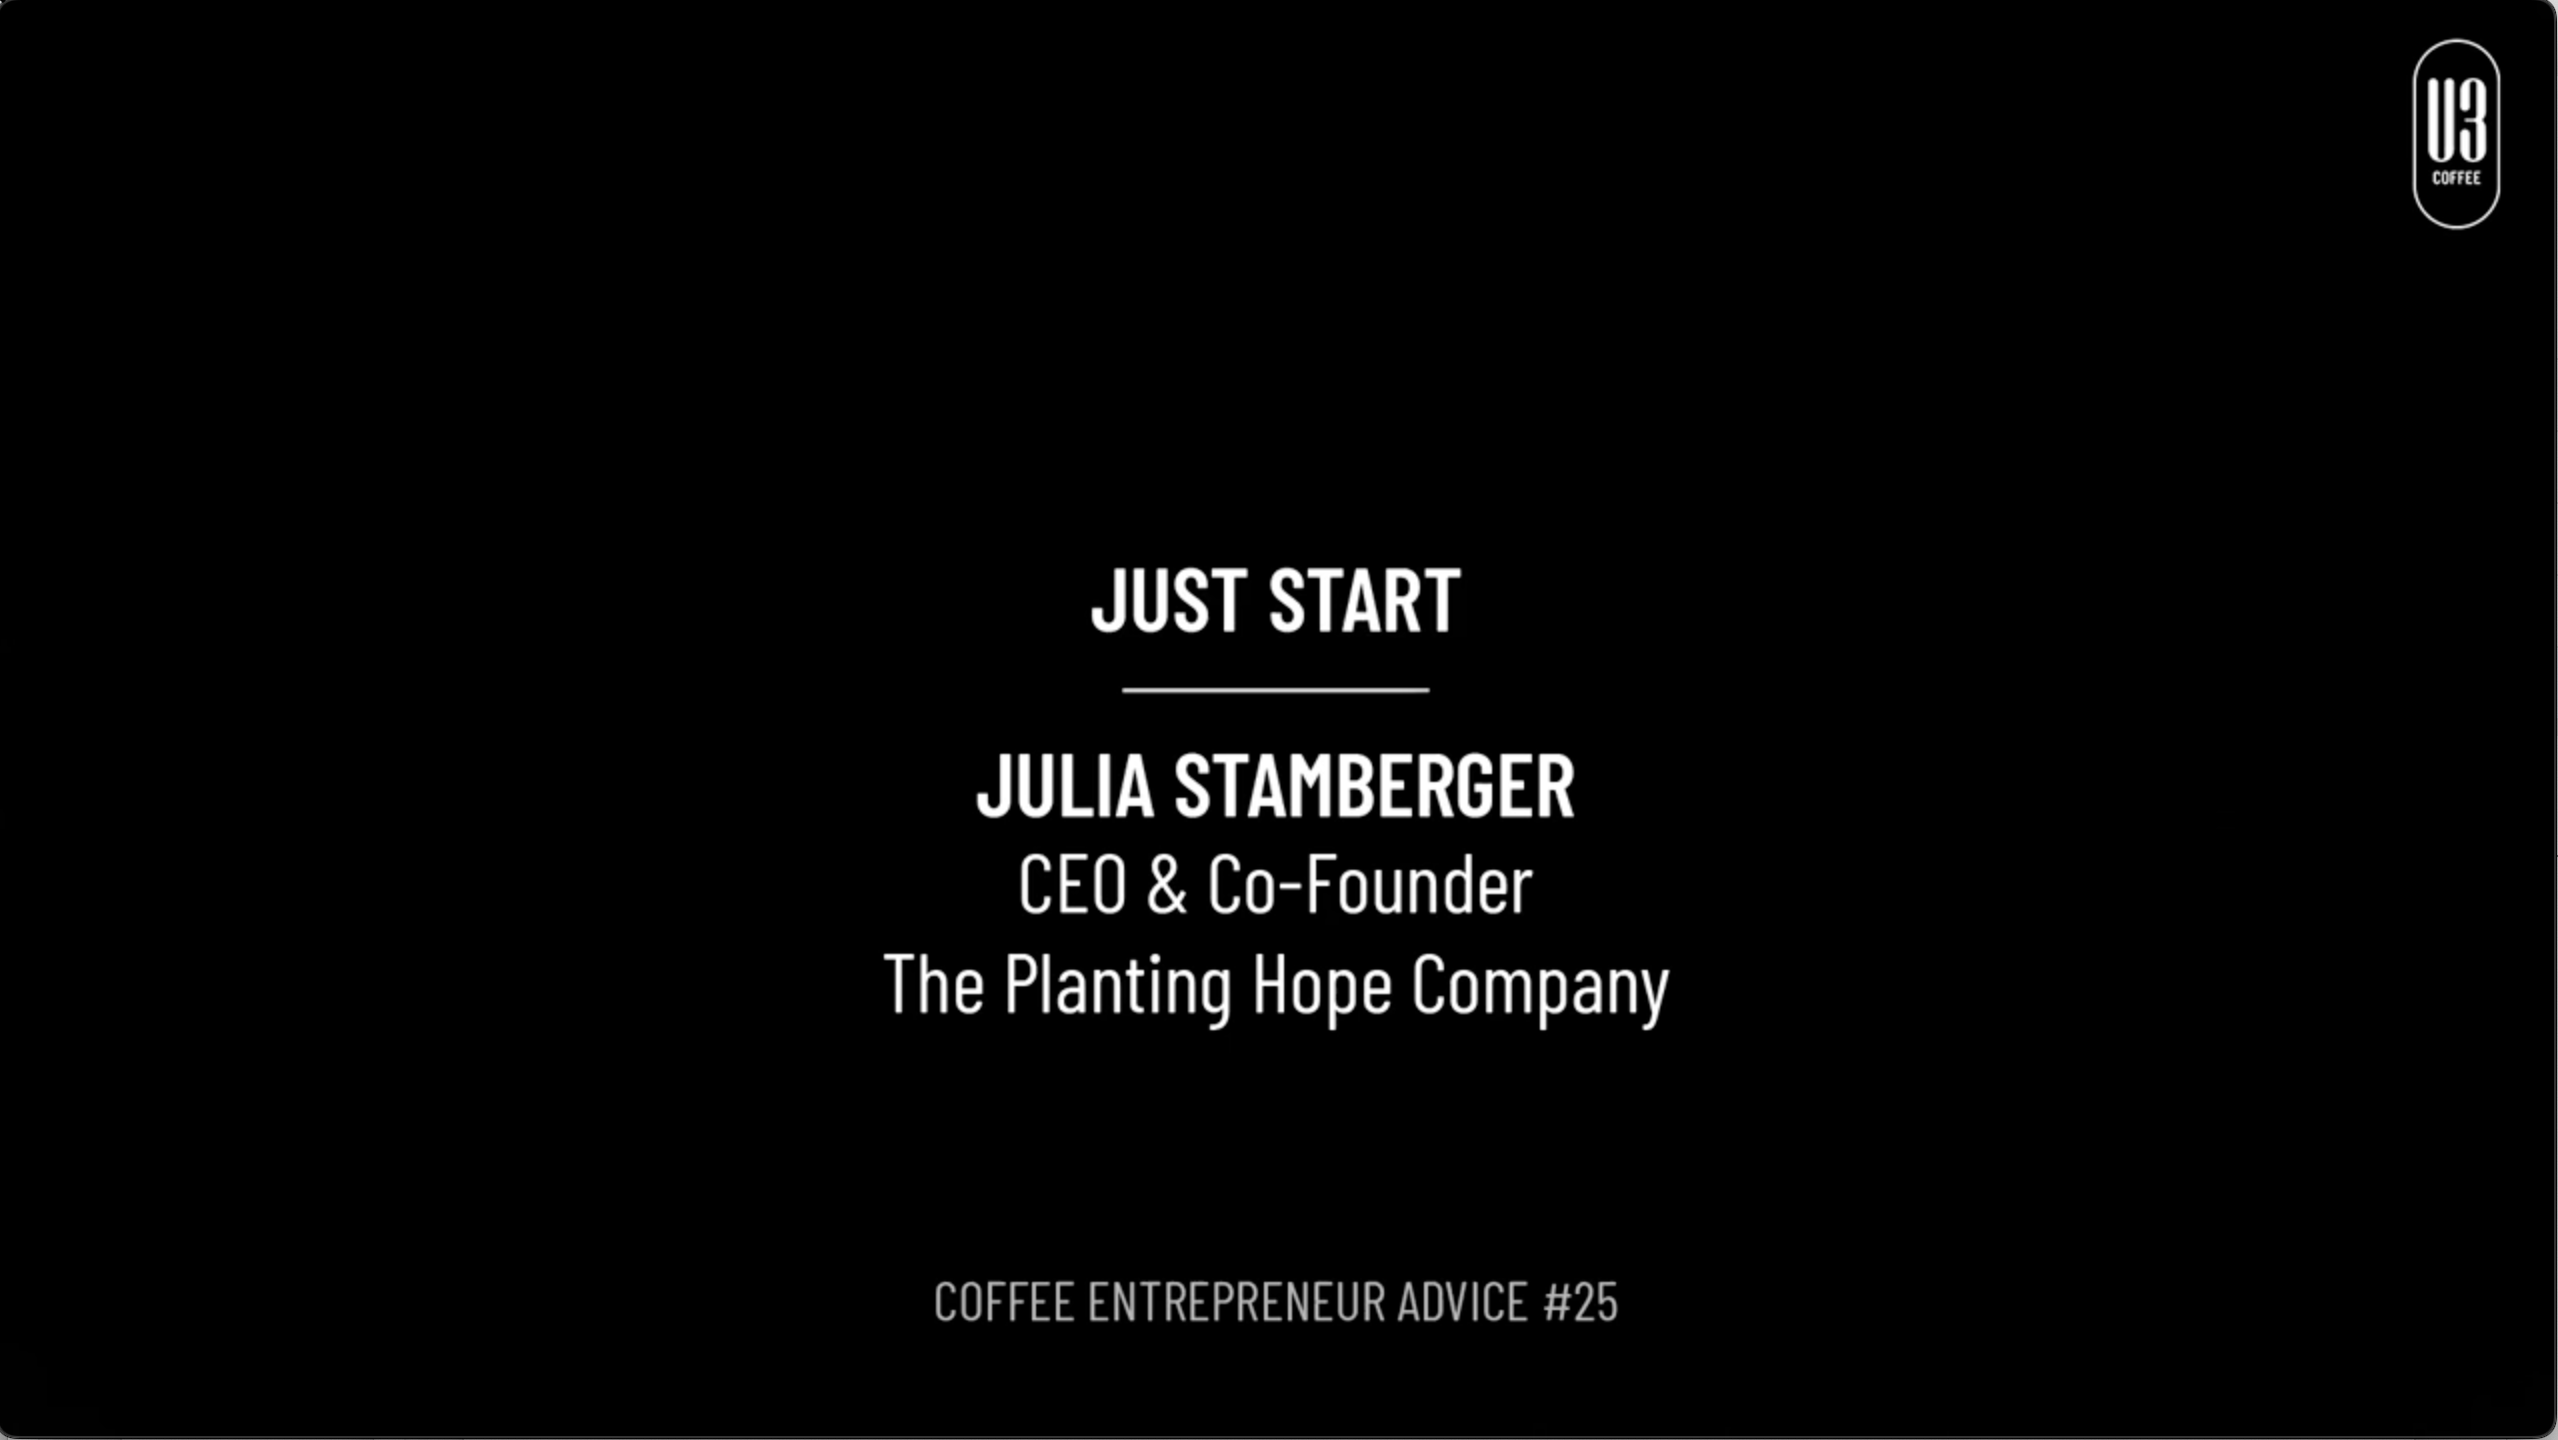 Julia Stamberger, CEO & Co-Founder of The Planting Hope Company gives her advice to just start.